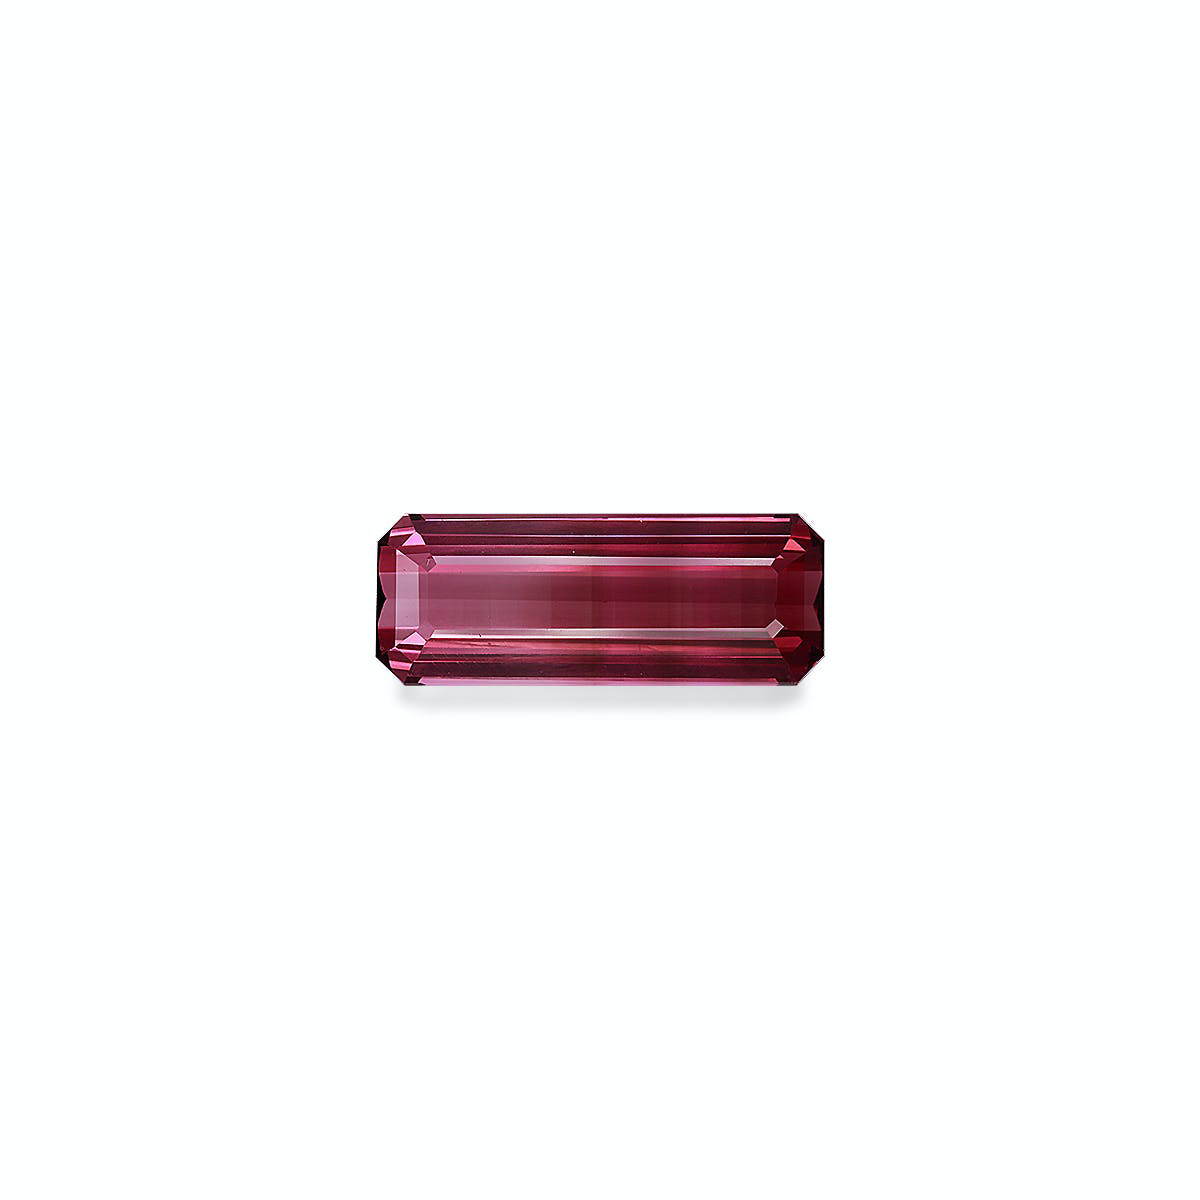 Picture of Pink Tourmaline 13.72ct (PT0520)